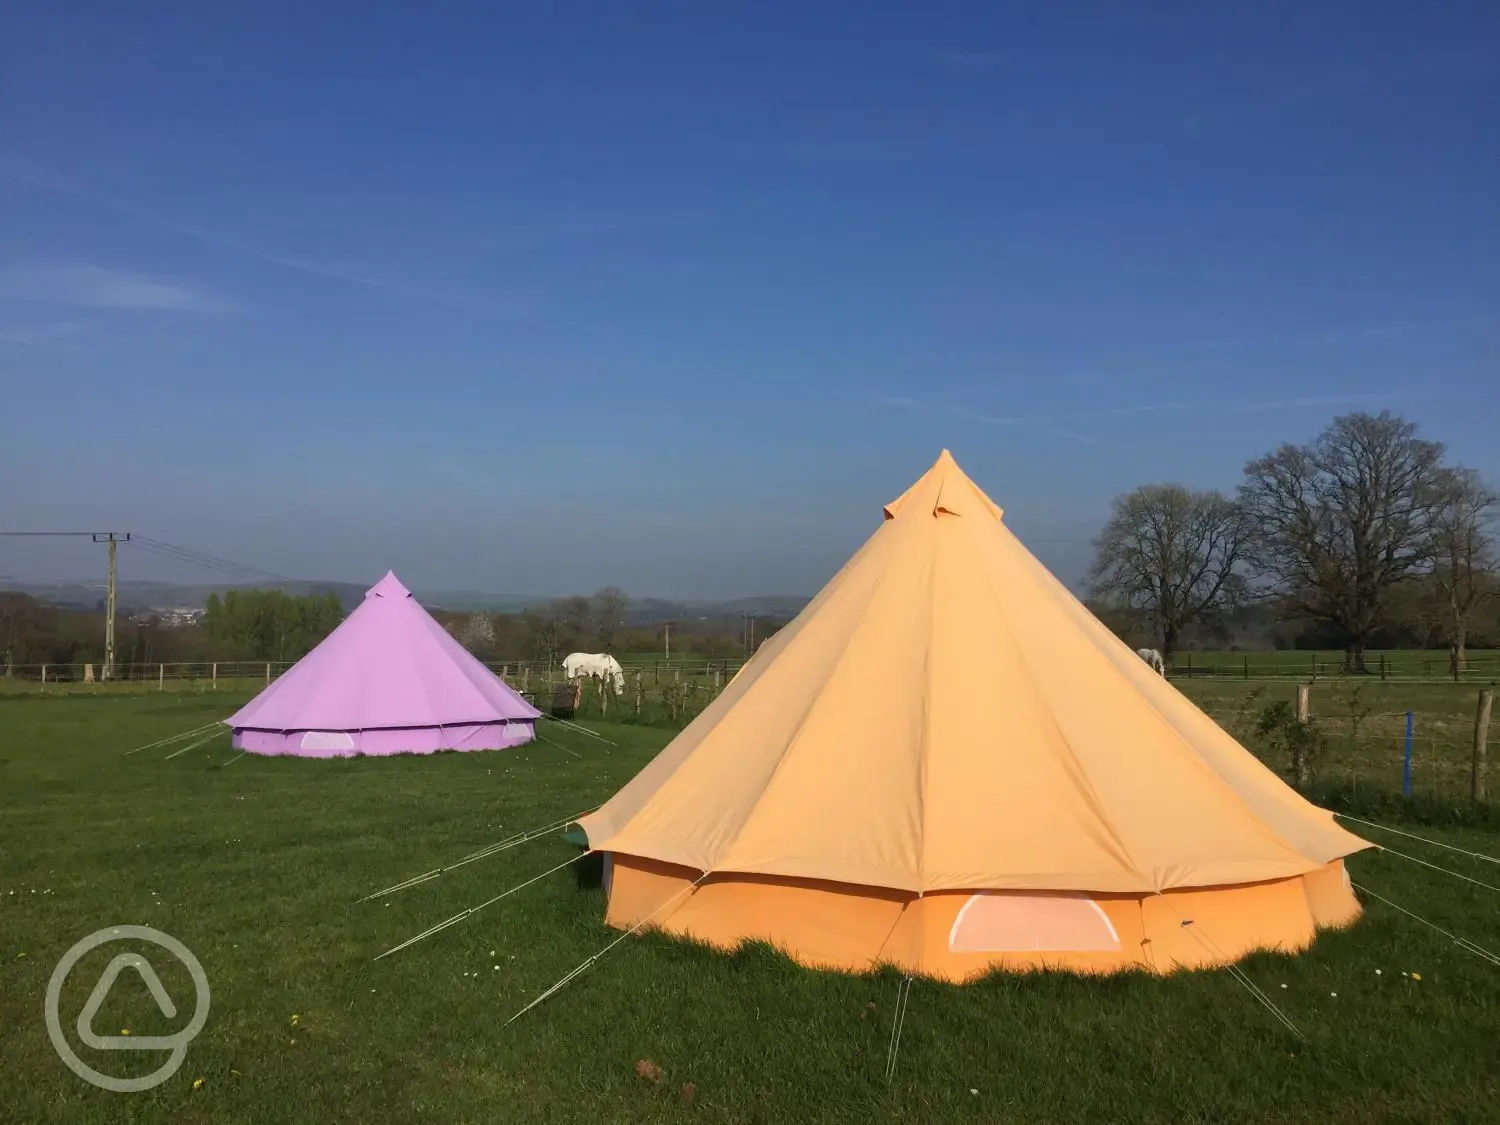 Horses grazing by the bell tents